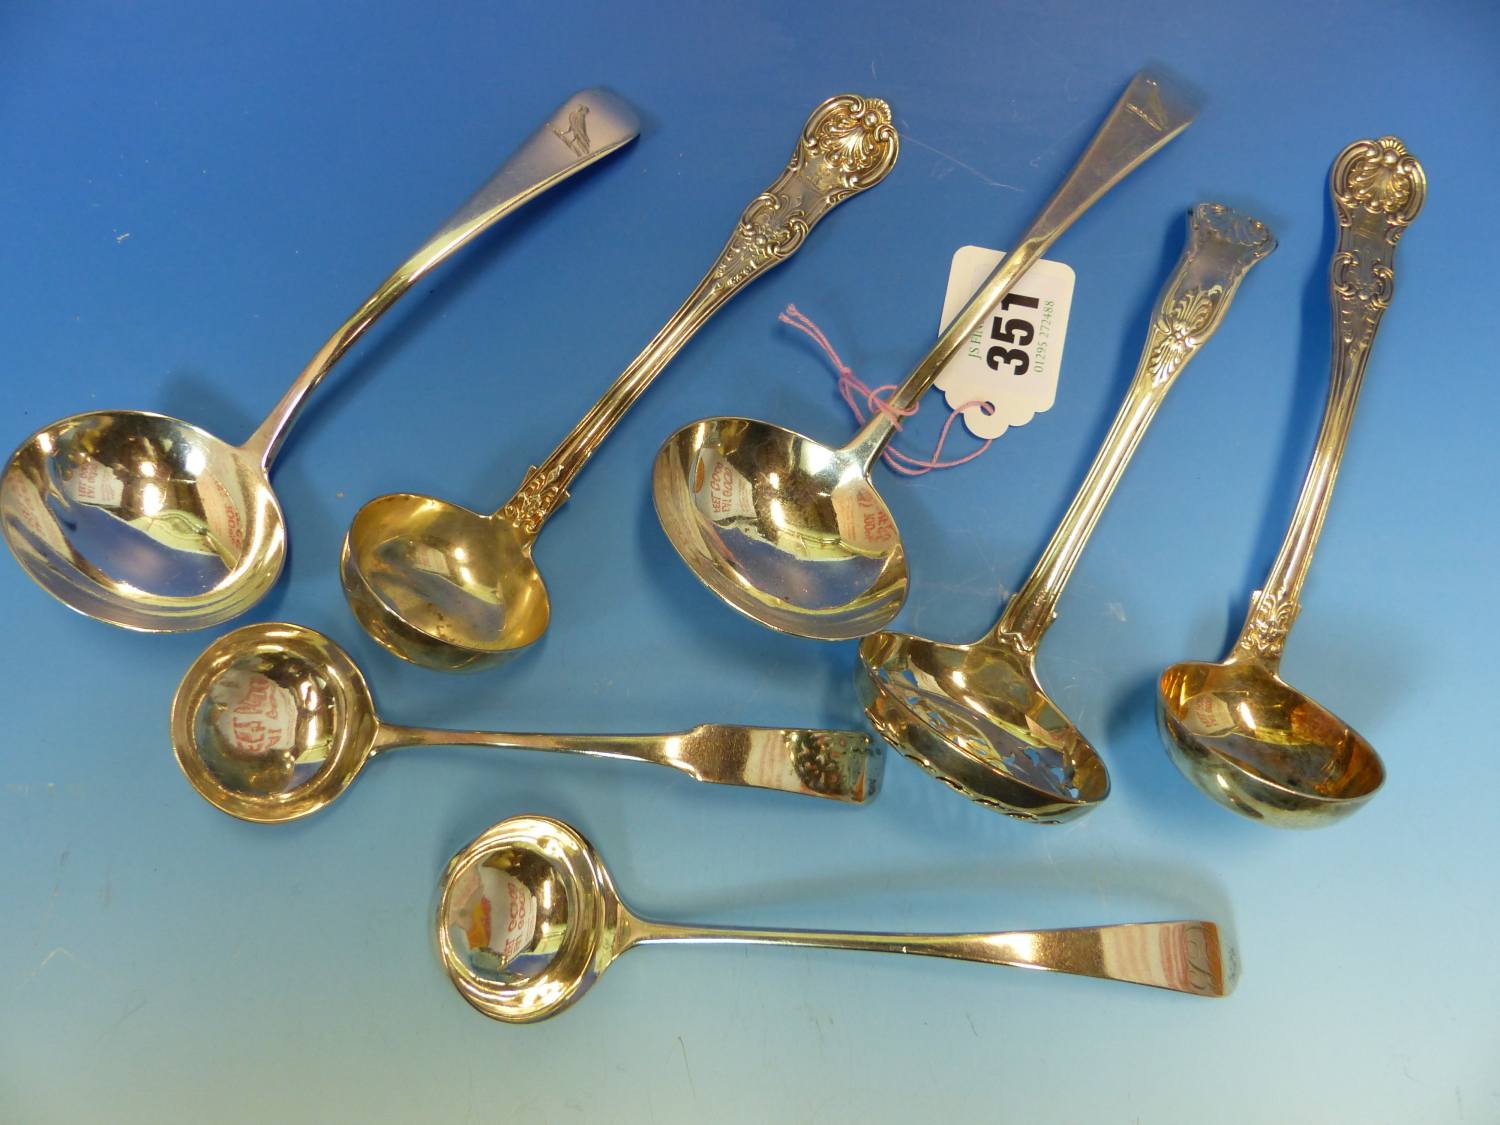 A PAIR OF 19th C. QUEENS PATTERN HALLMARKED SILVER SAUCE LADLES DATED 1851 GLASGOW FOR JOHN - Image 2 of 28